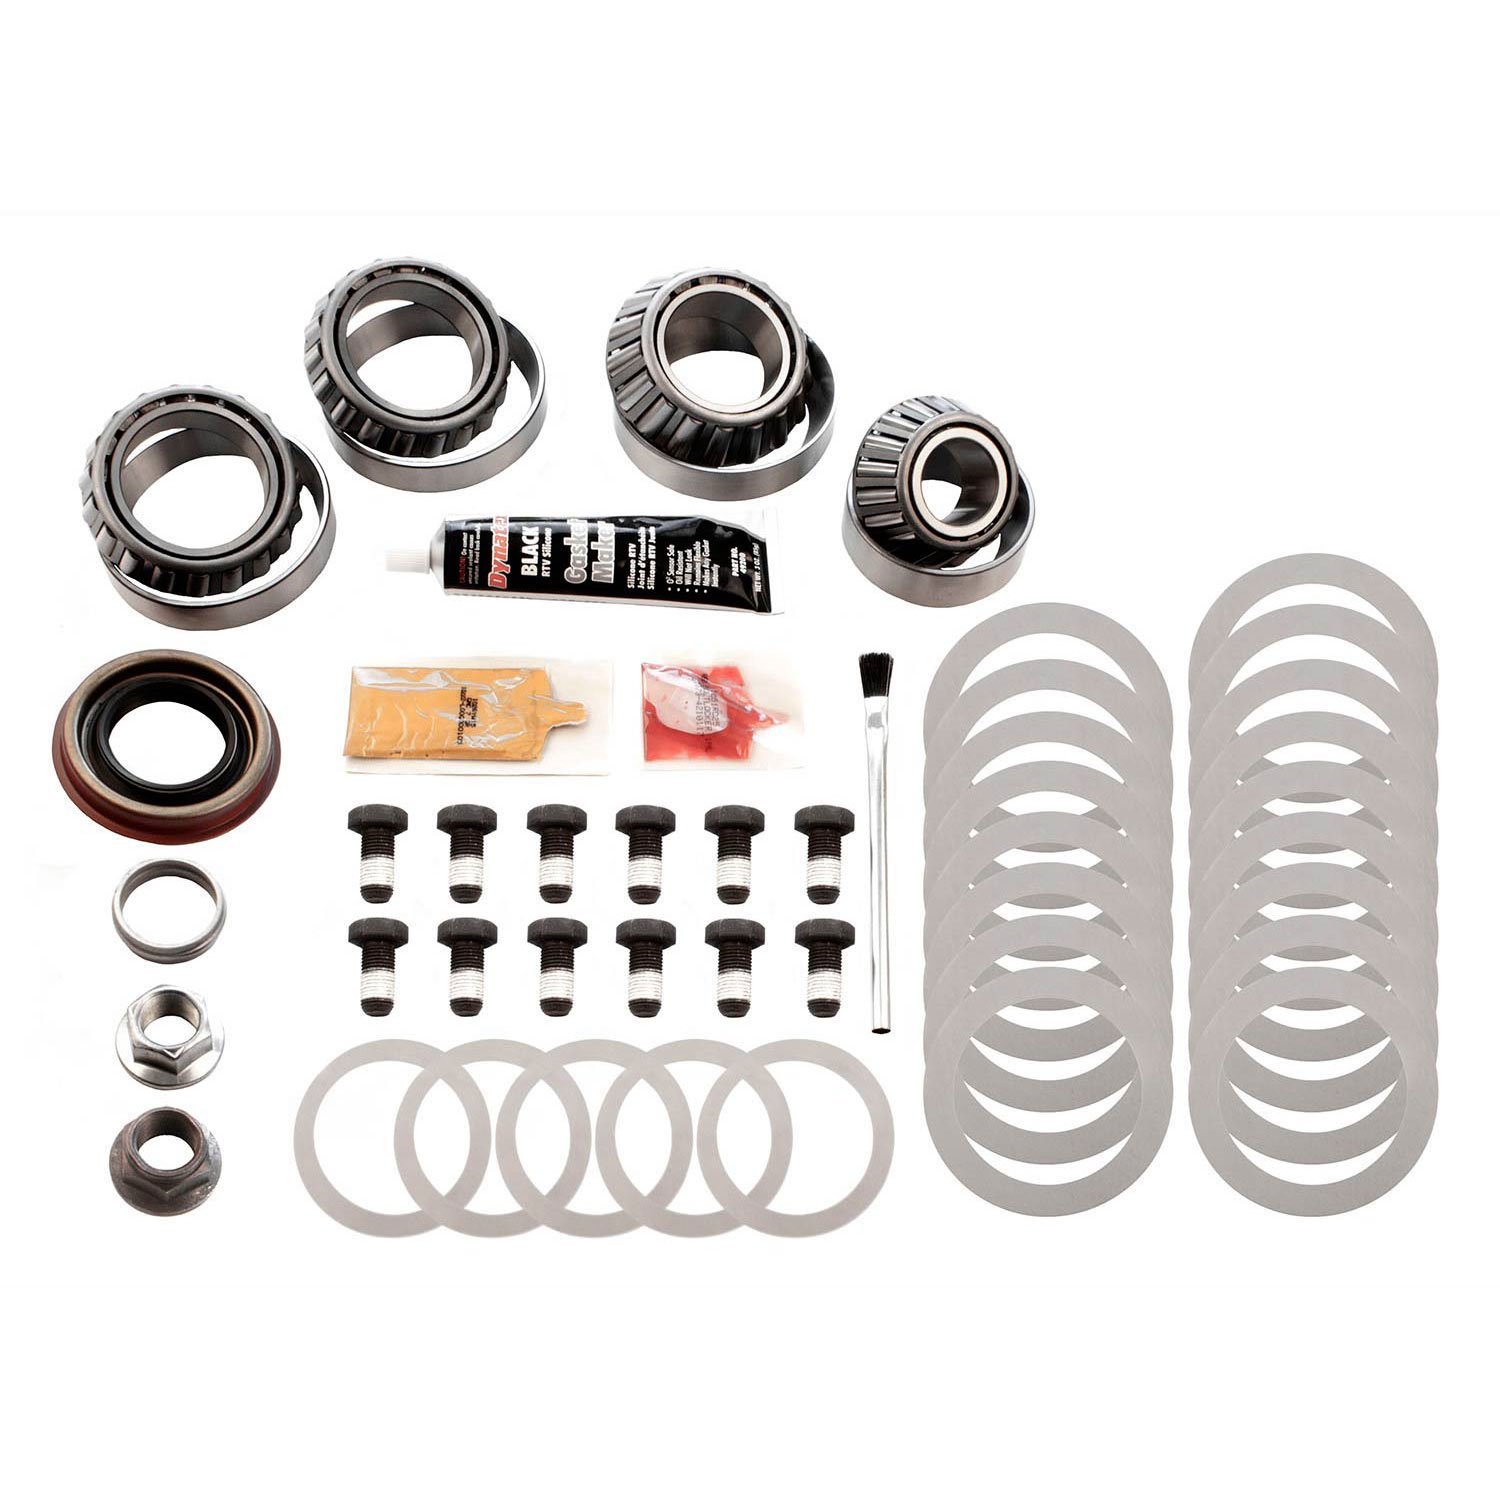 Master Installation Kit Ford 9.75" Includes: